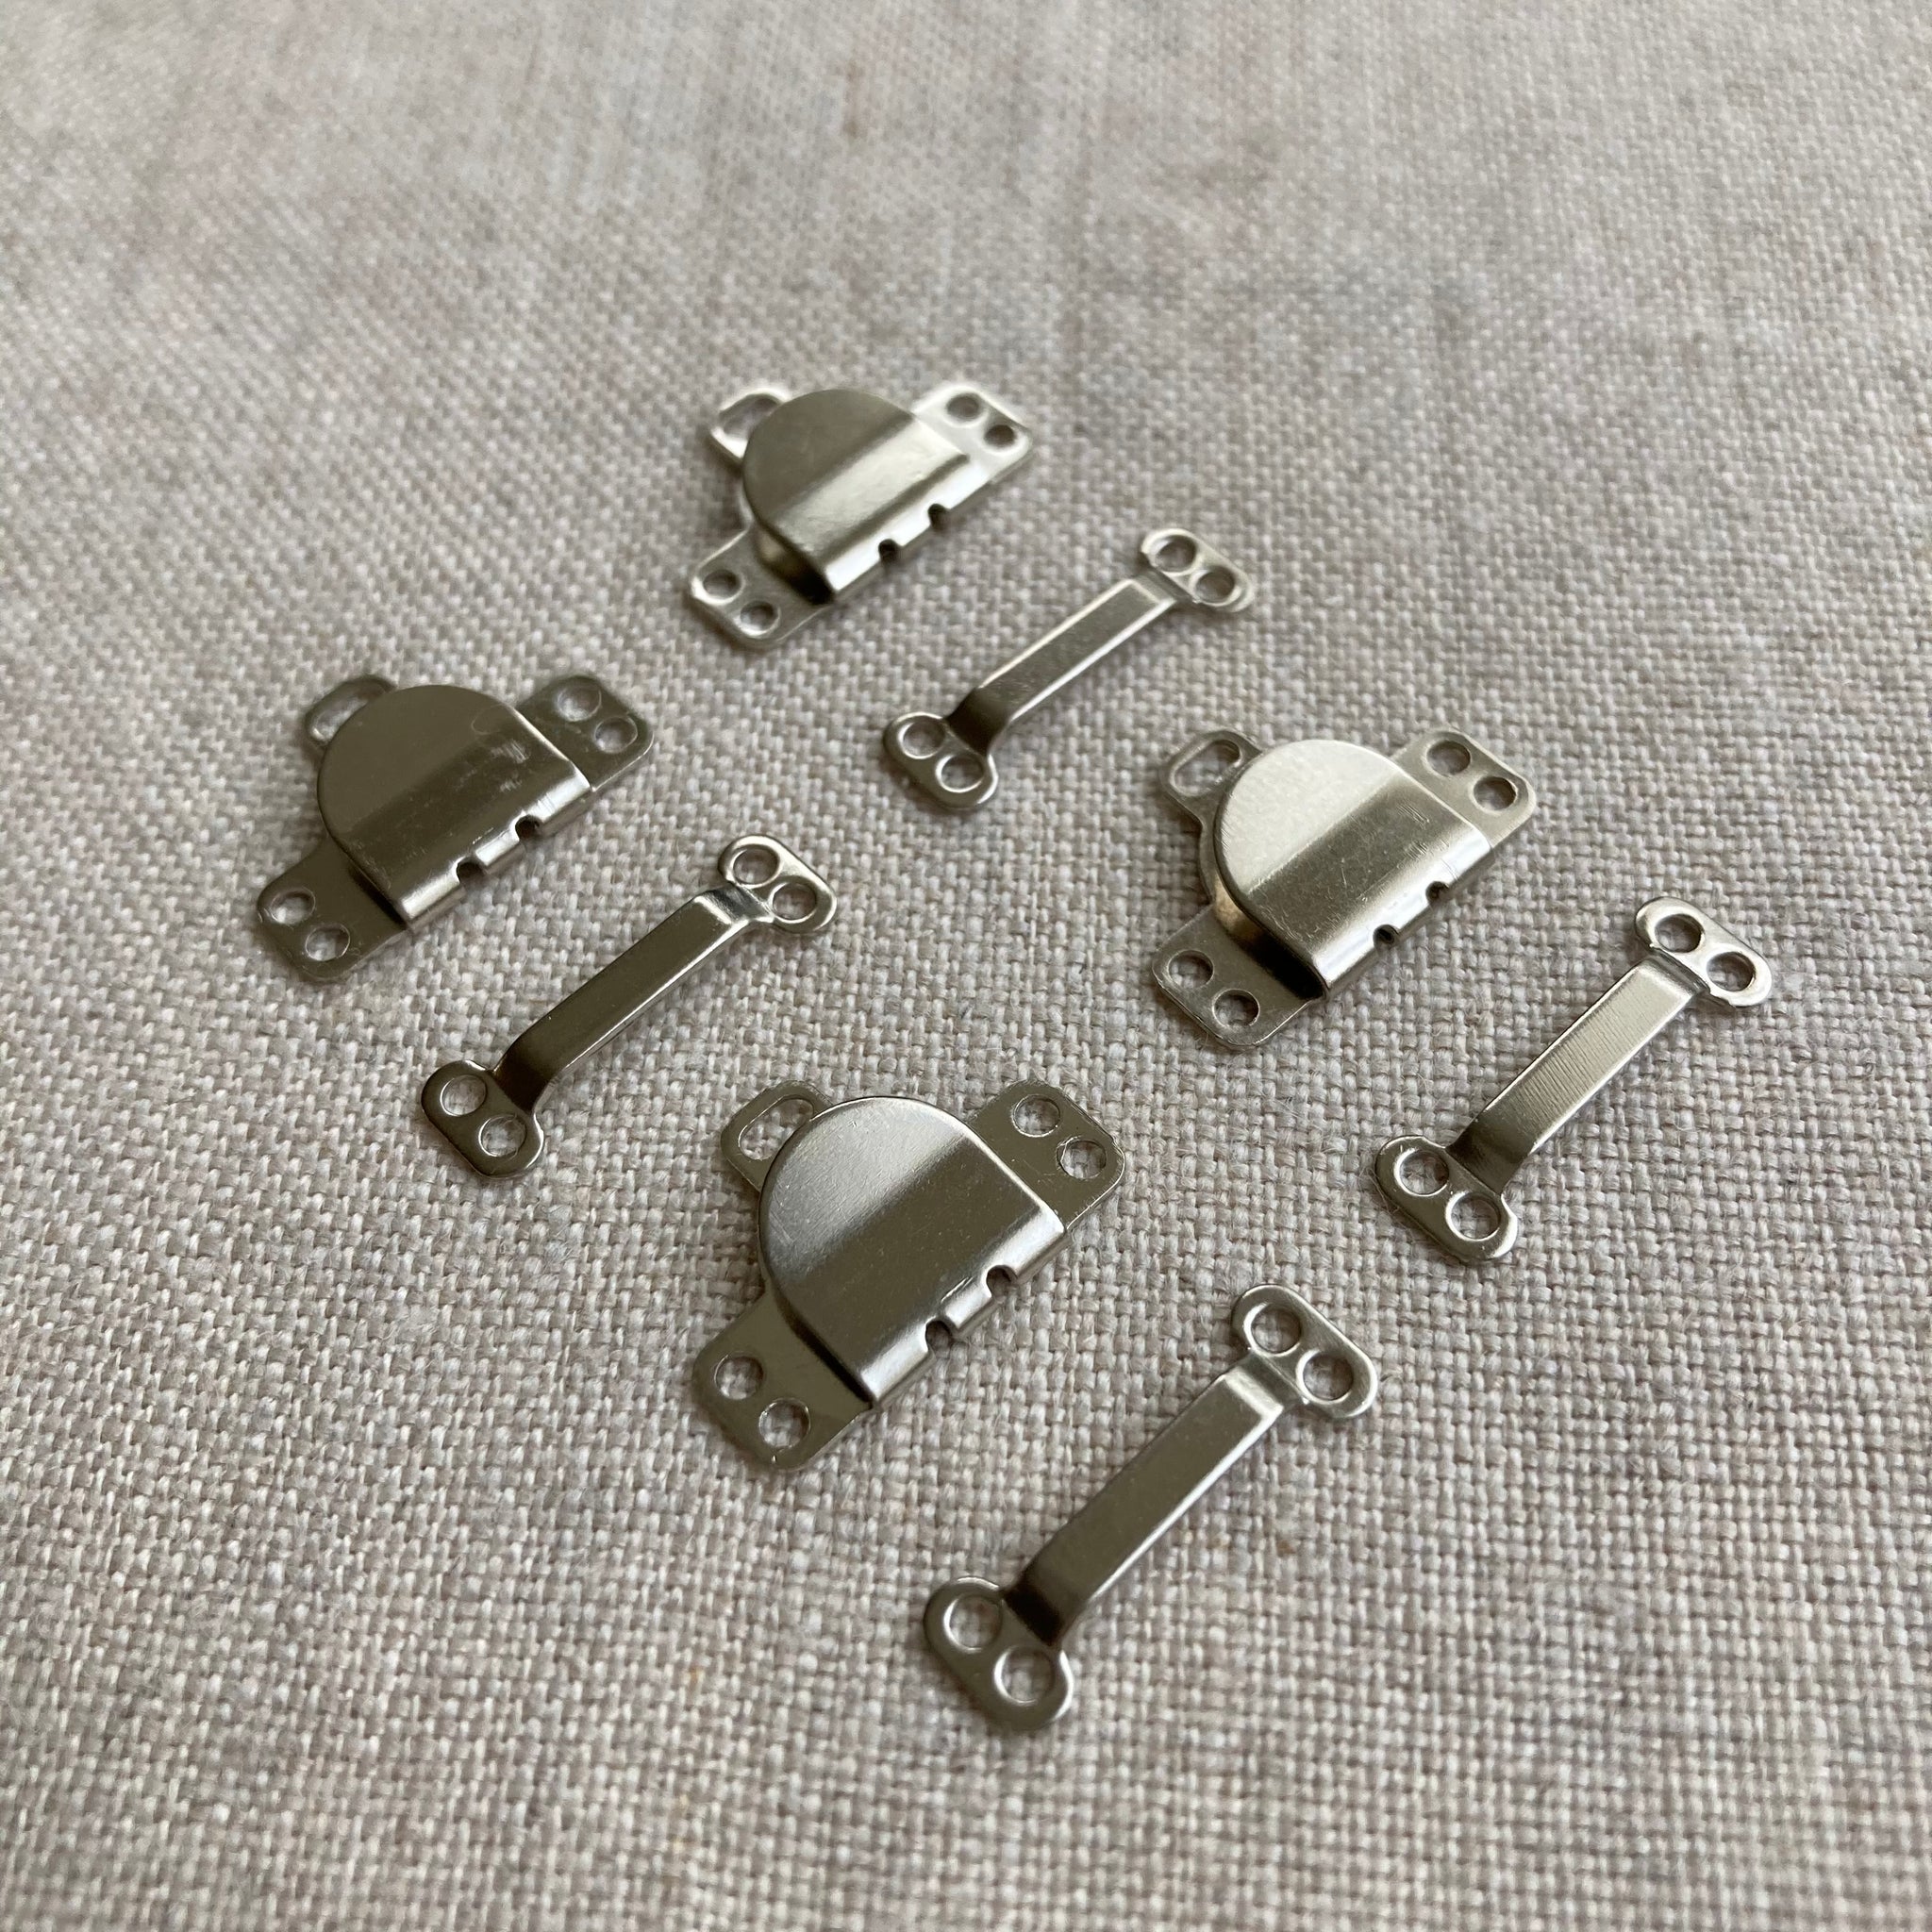 20set Metal Hook and Eye Closures Hook and Bar Fasteners 4 Part Hook and Eye  Clasp Sew on Hook and Bar for Trouser Skirts Pants -  Canada